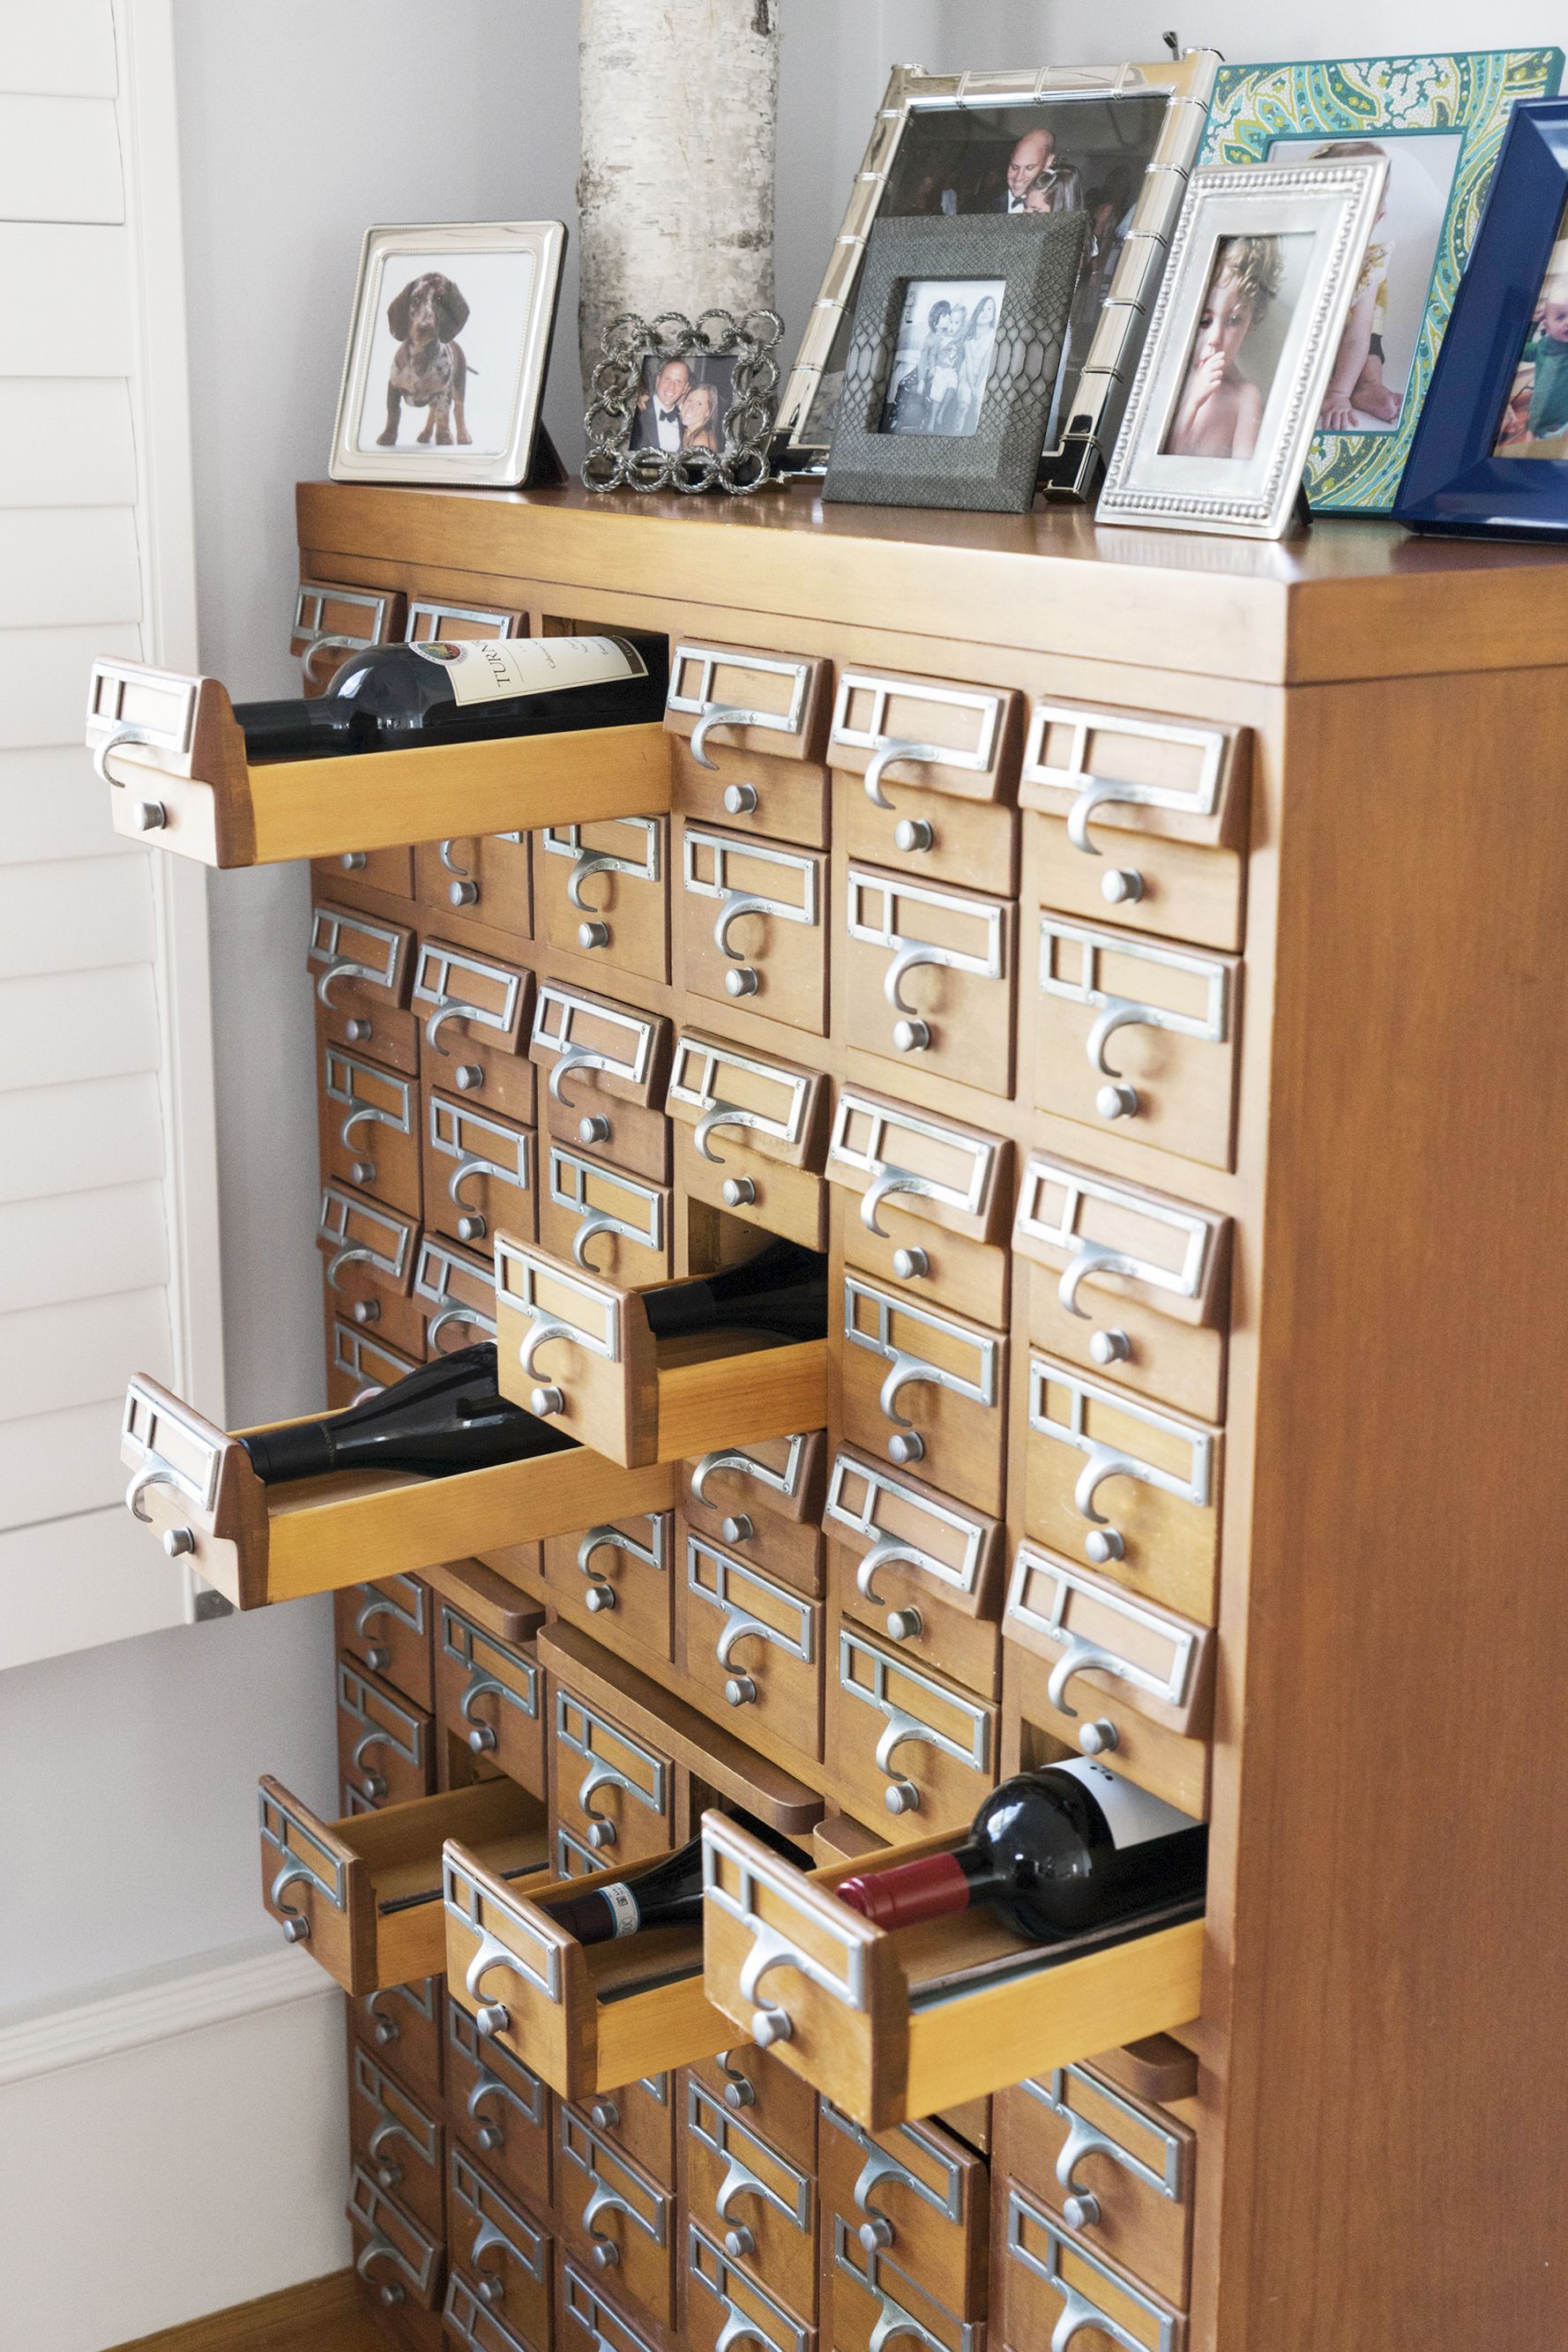 How To Organize Your Home: A Place for Every Item - Stoney Built for Life